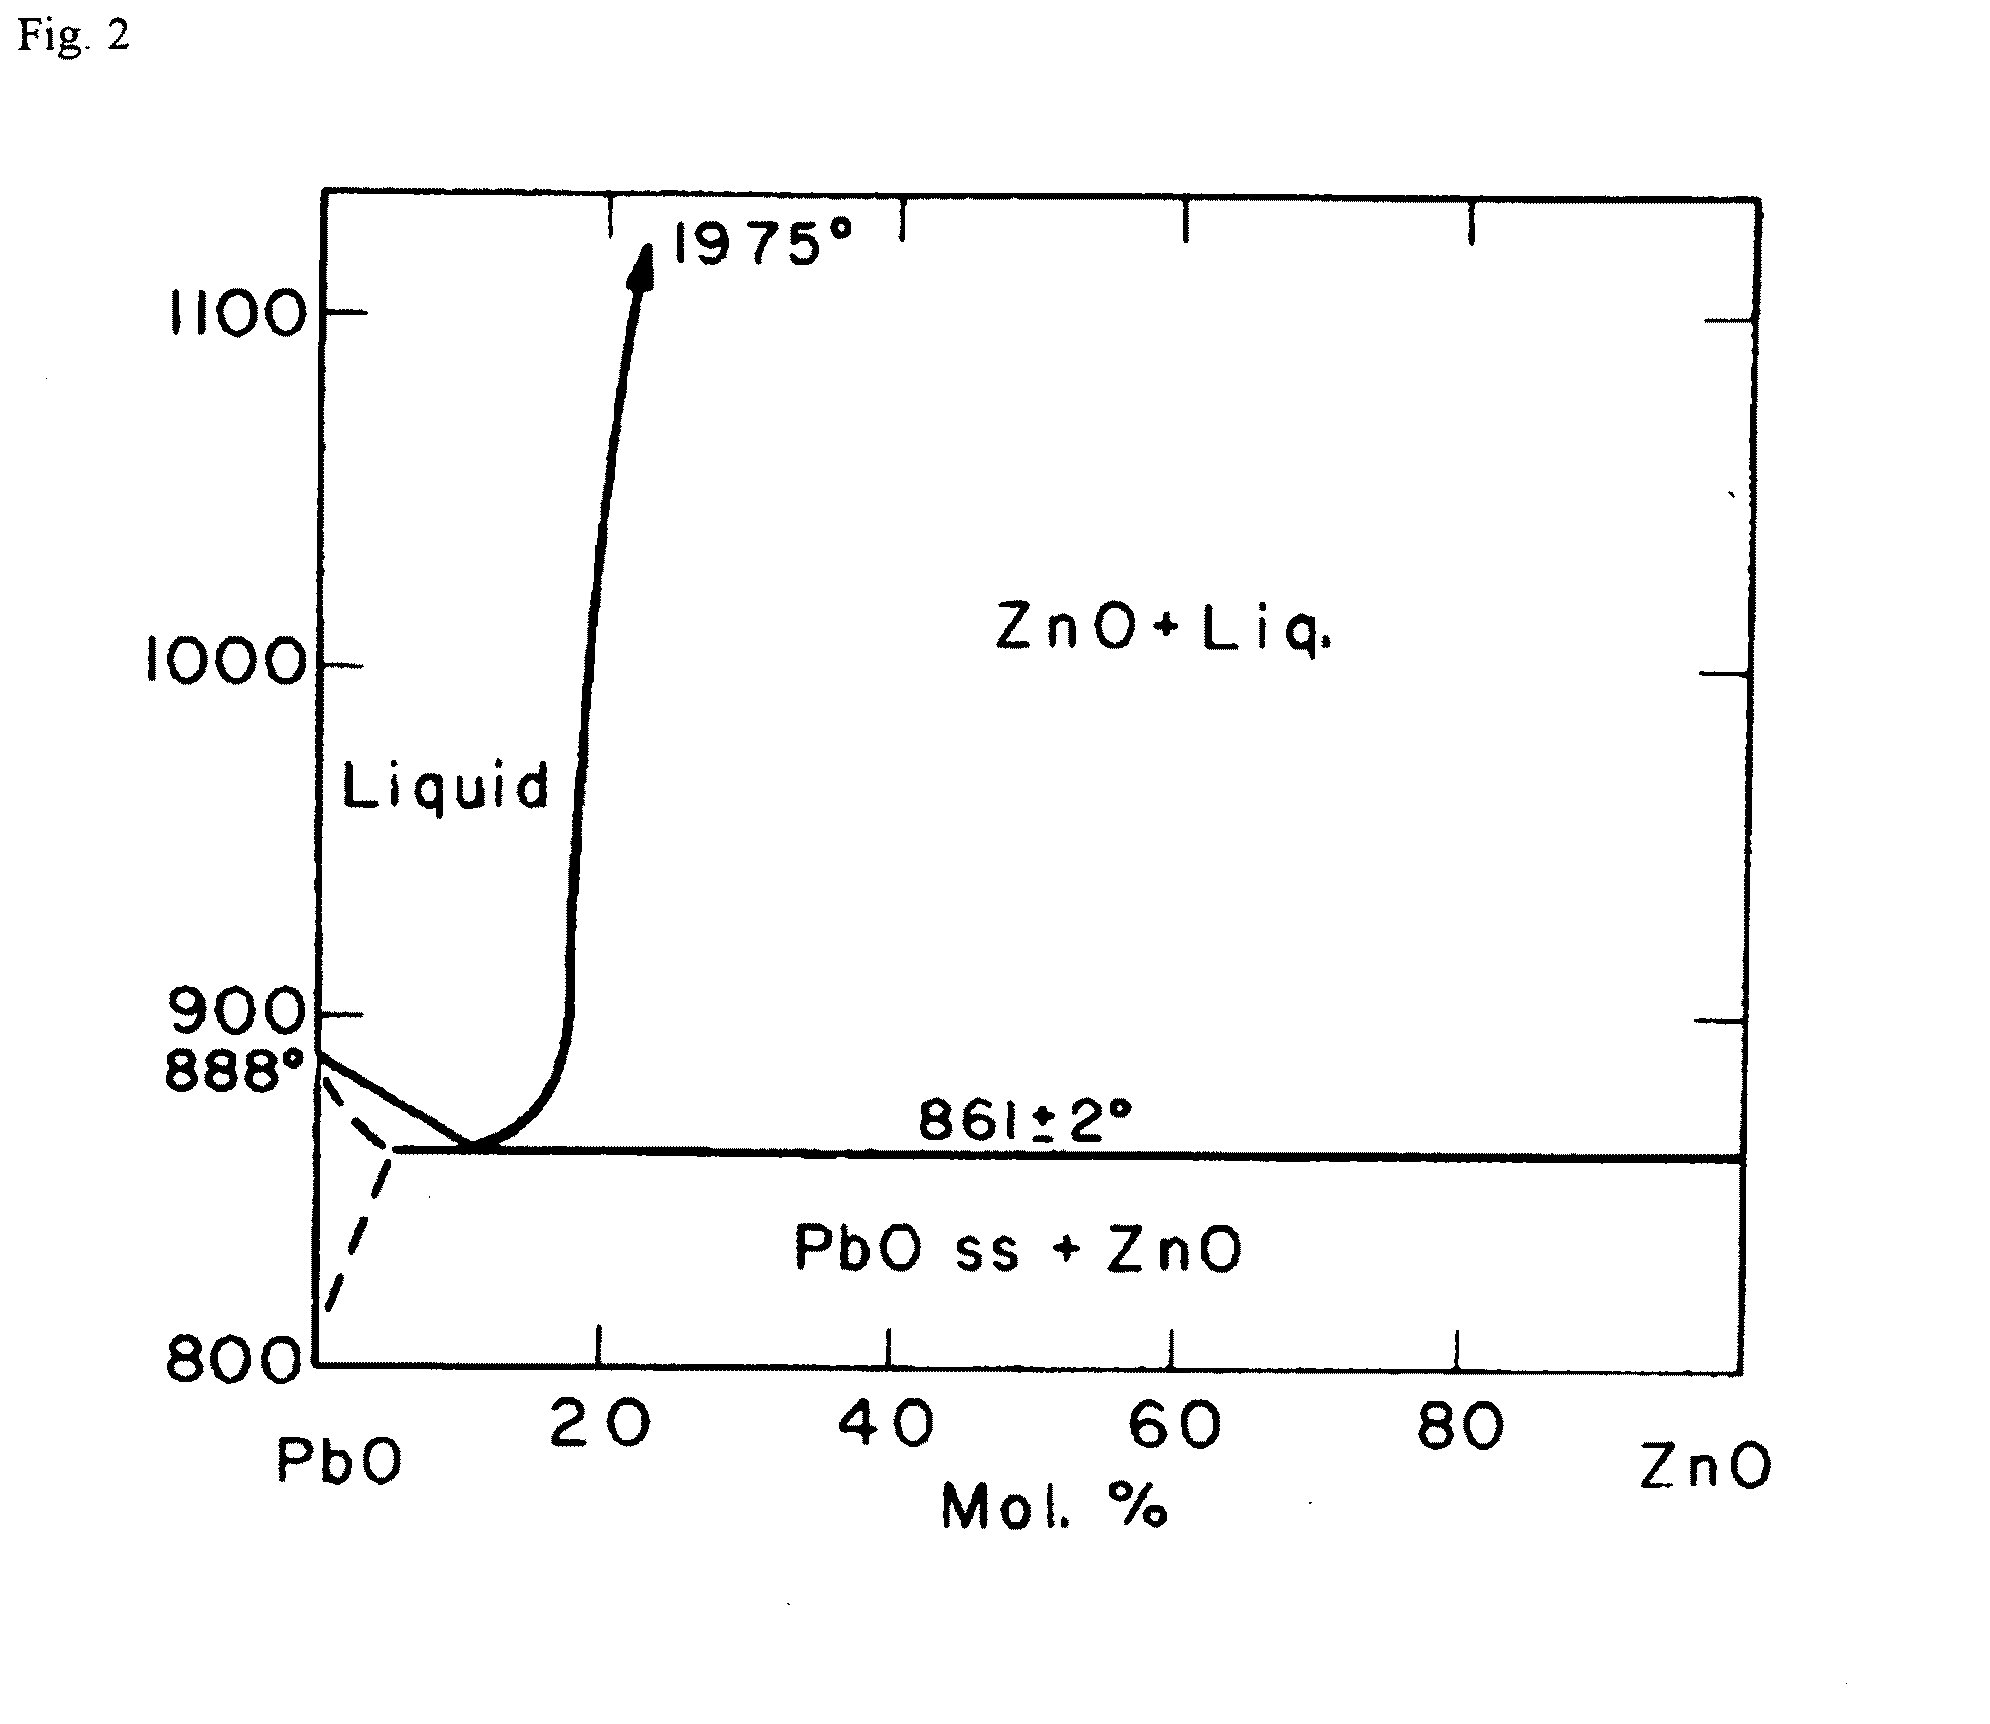 Process for Producing Zno Single Crystal According to Method of Liquid Phase Growth